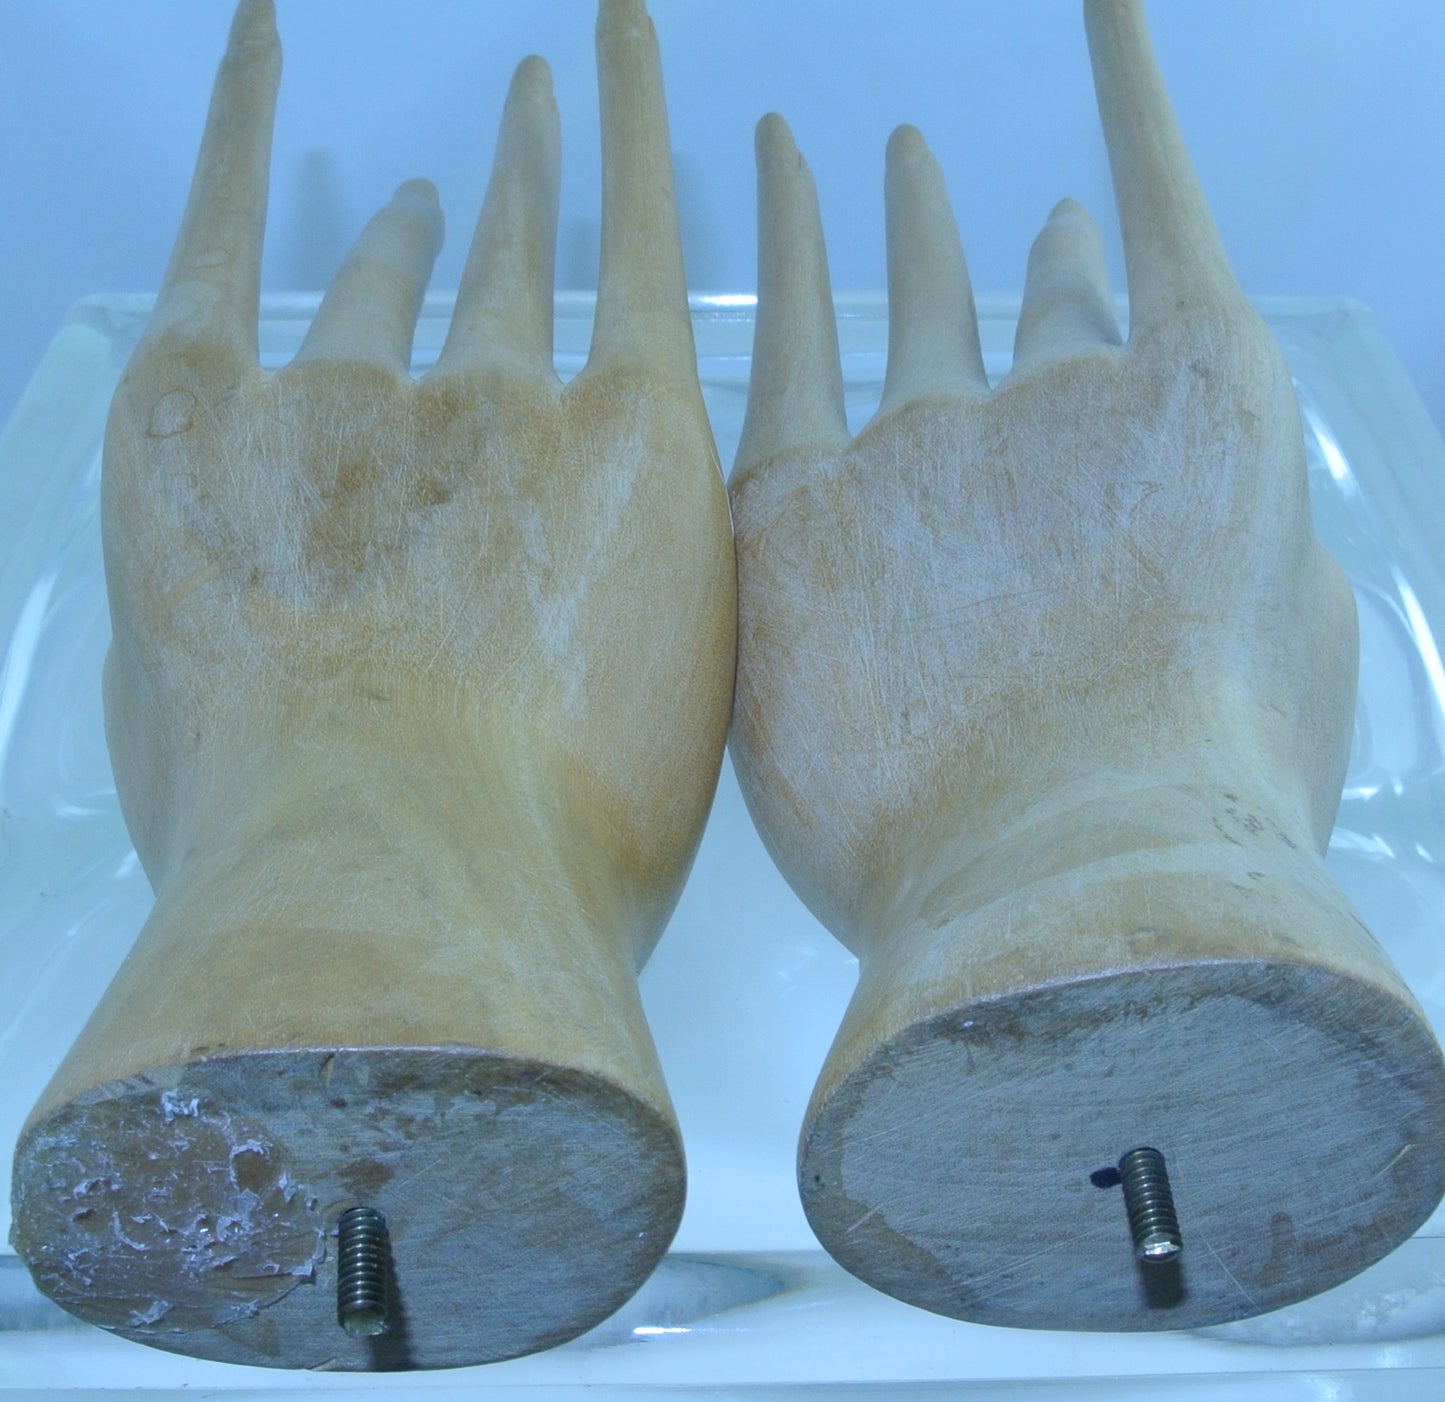 BEAUTIFUL VINTAGE WOODEN MANNEQUIN HANDS LONG ELEGANT FINGERS FEMALE COUNTER DISPLAY RINGS GLOVES ETC PAIR - MASS PRODUCED